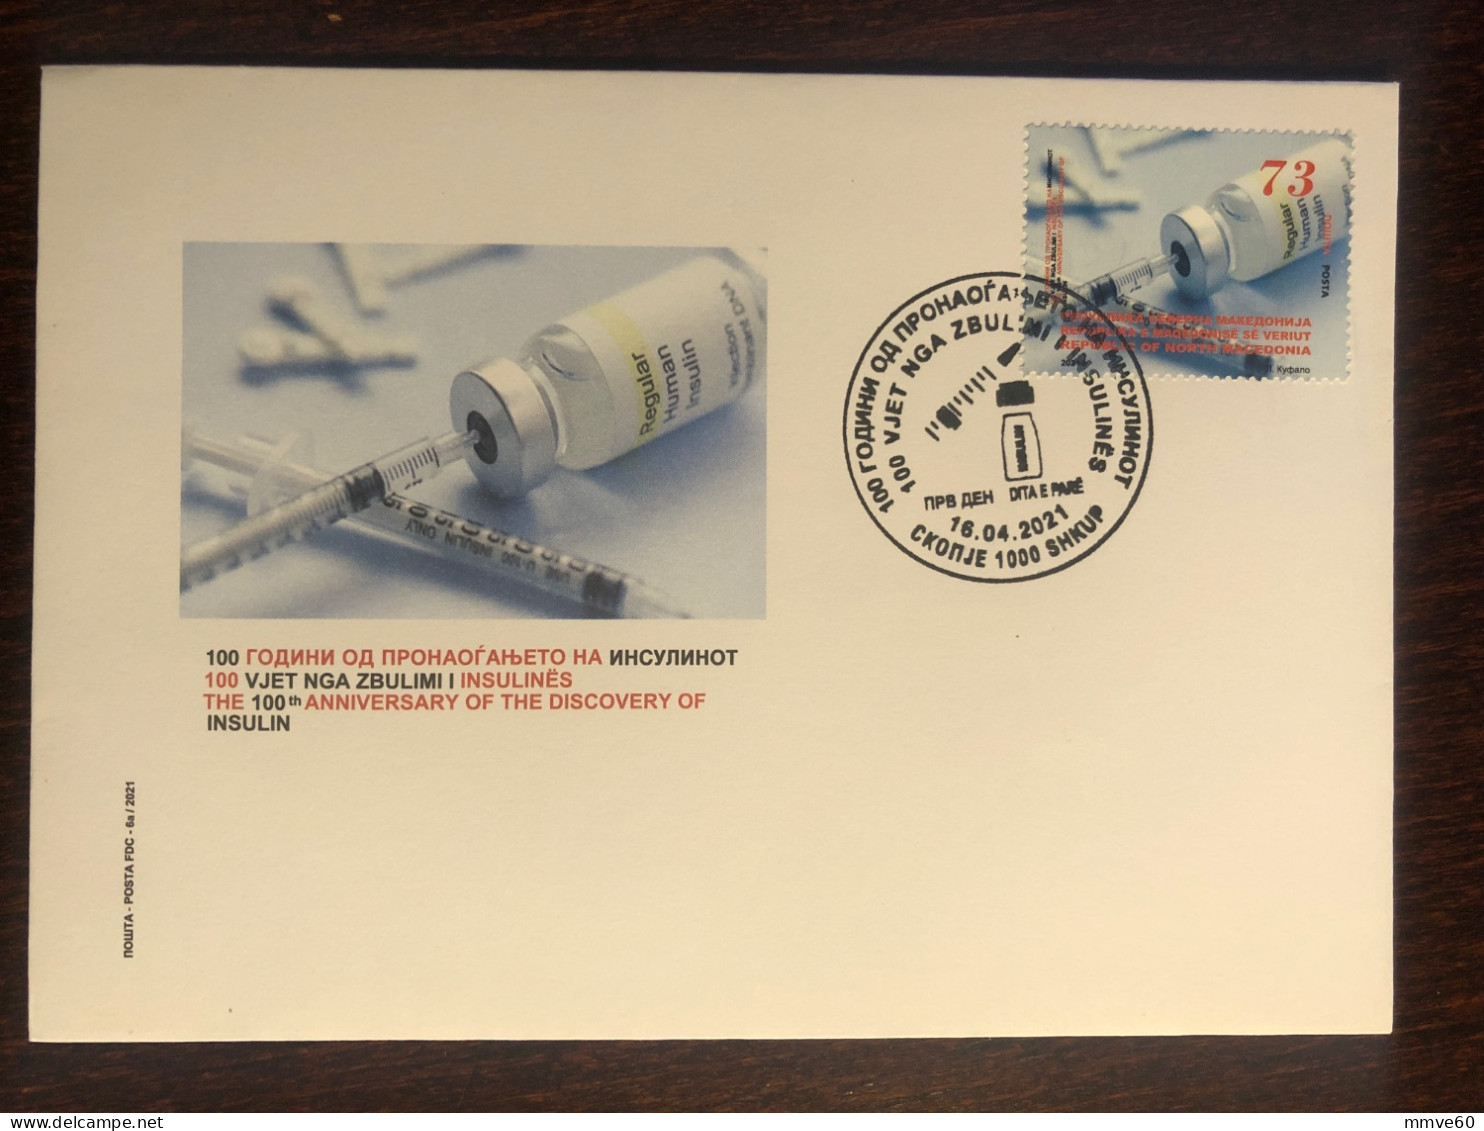 MACEDONIA FDC COVER 2021 YEAR DIABETES INSULIN HEALTH MEDICINE STAMPS - Macédoine Du Nord